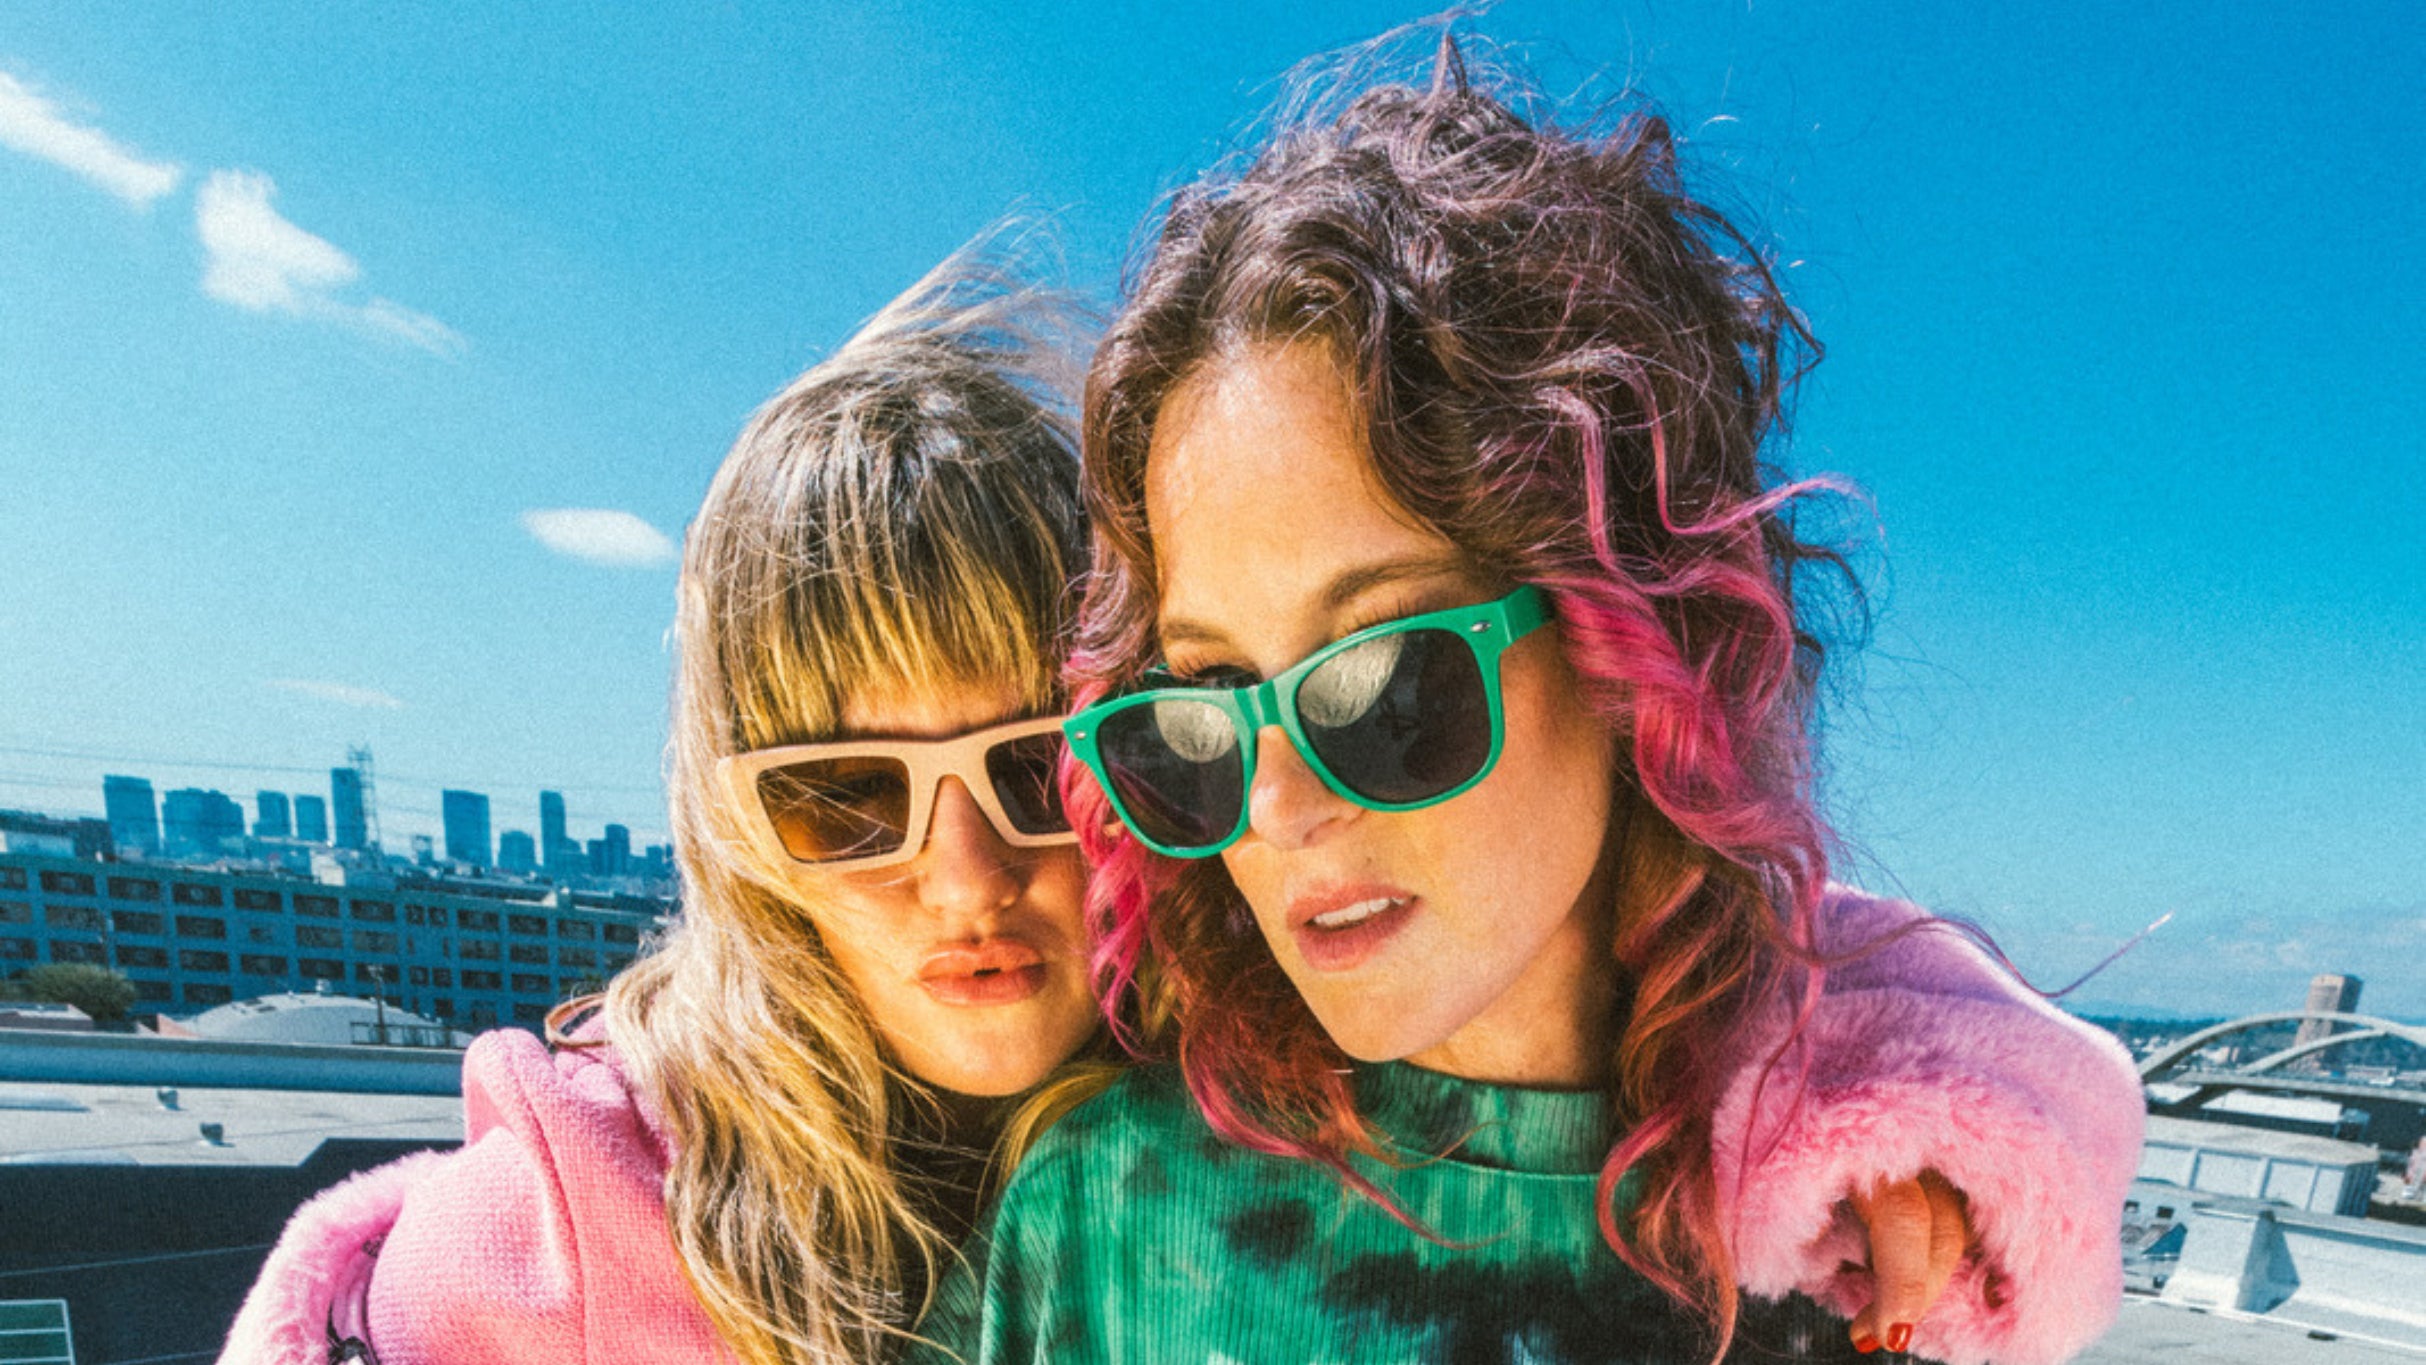 Deap Vally (Farewell Tour) at The Observatory